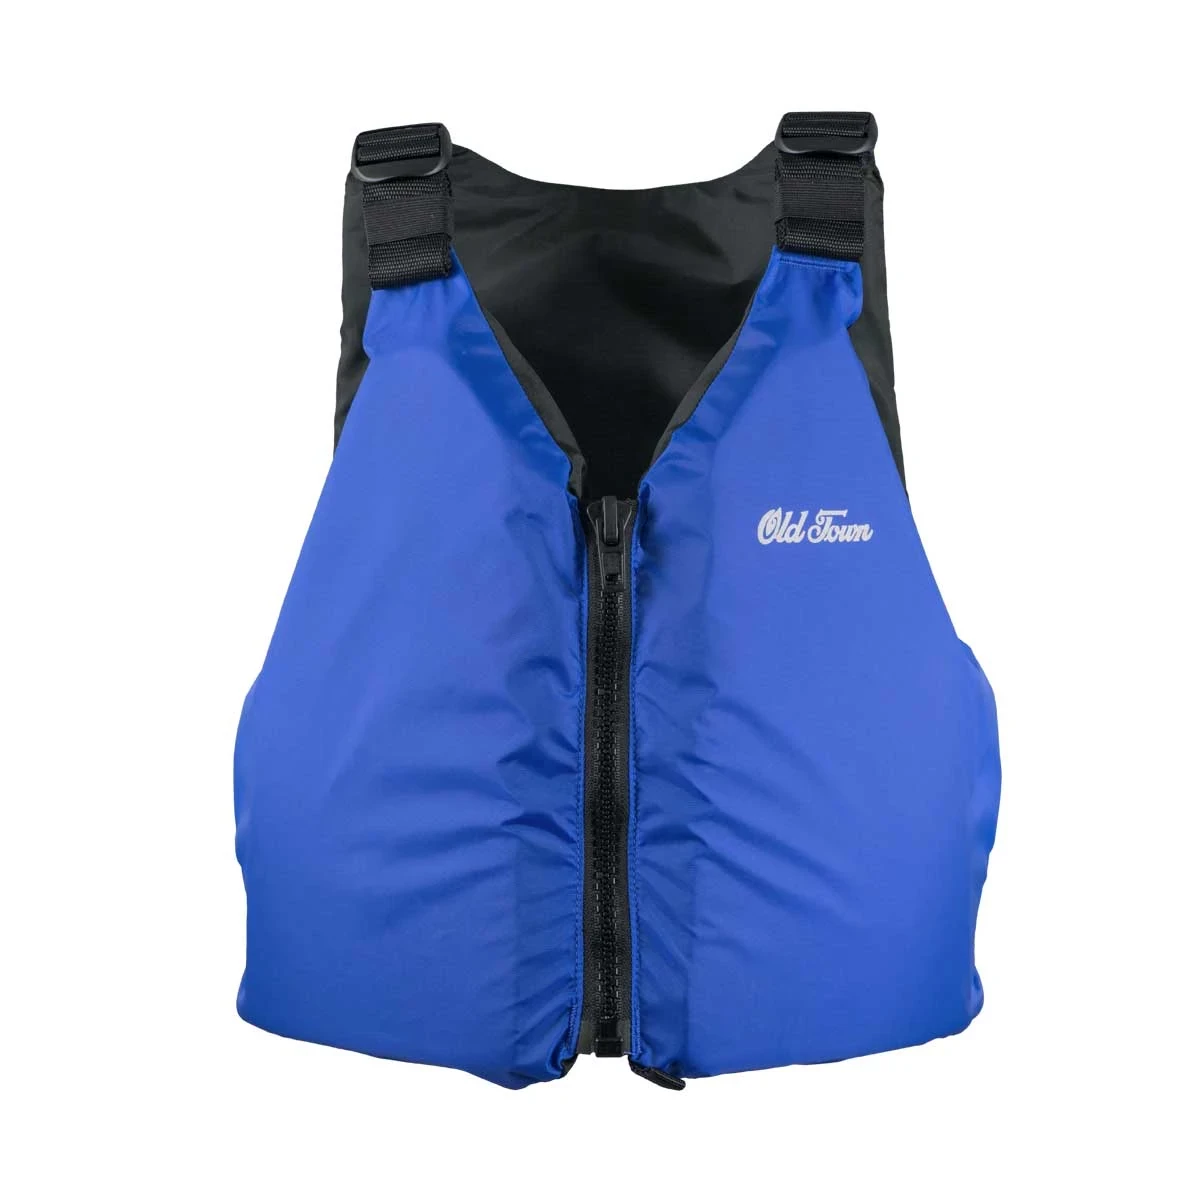 Outfitter Universal PFD - Royal